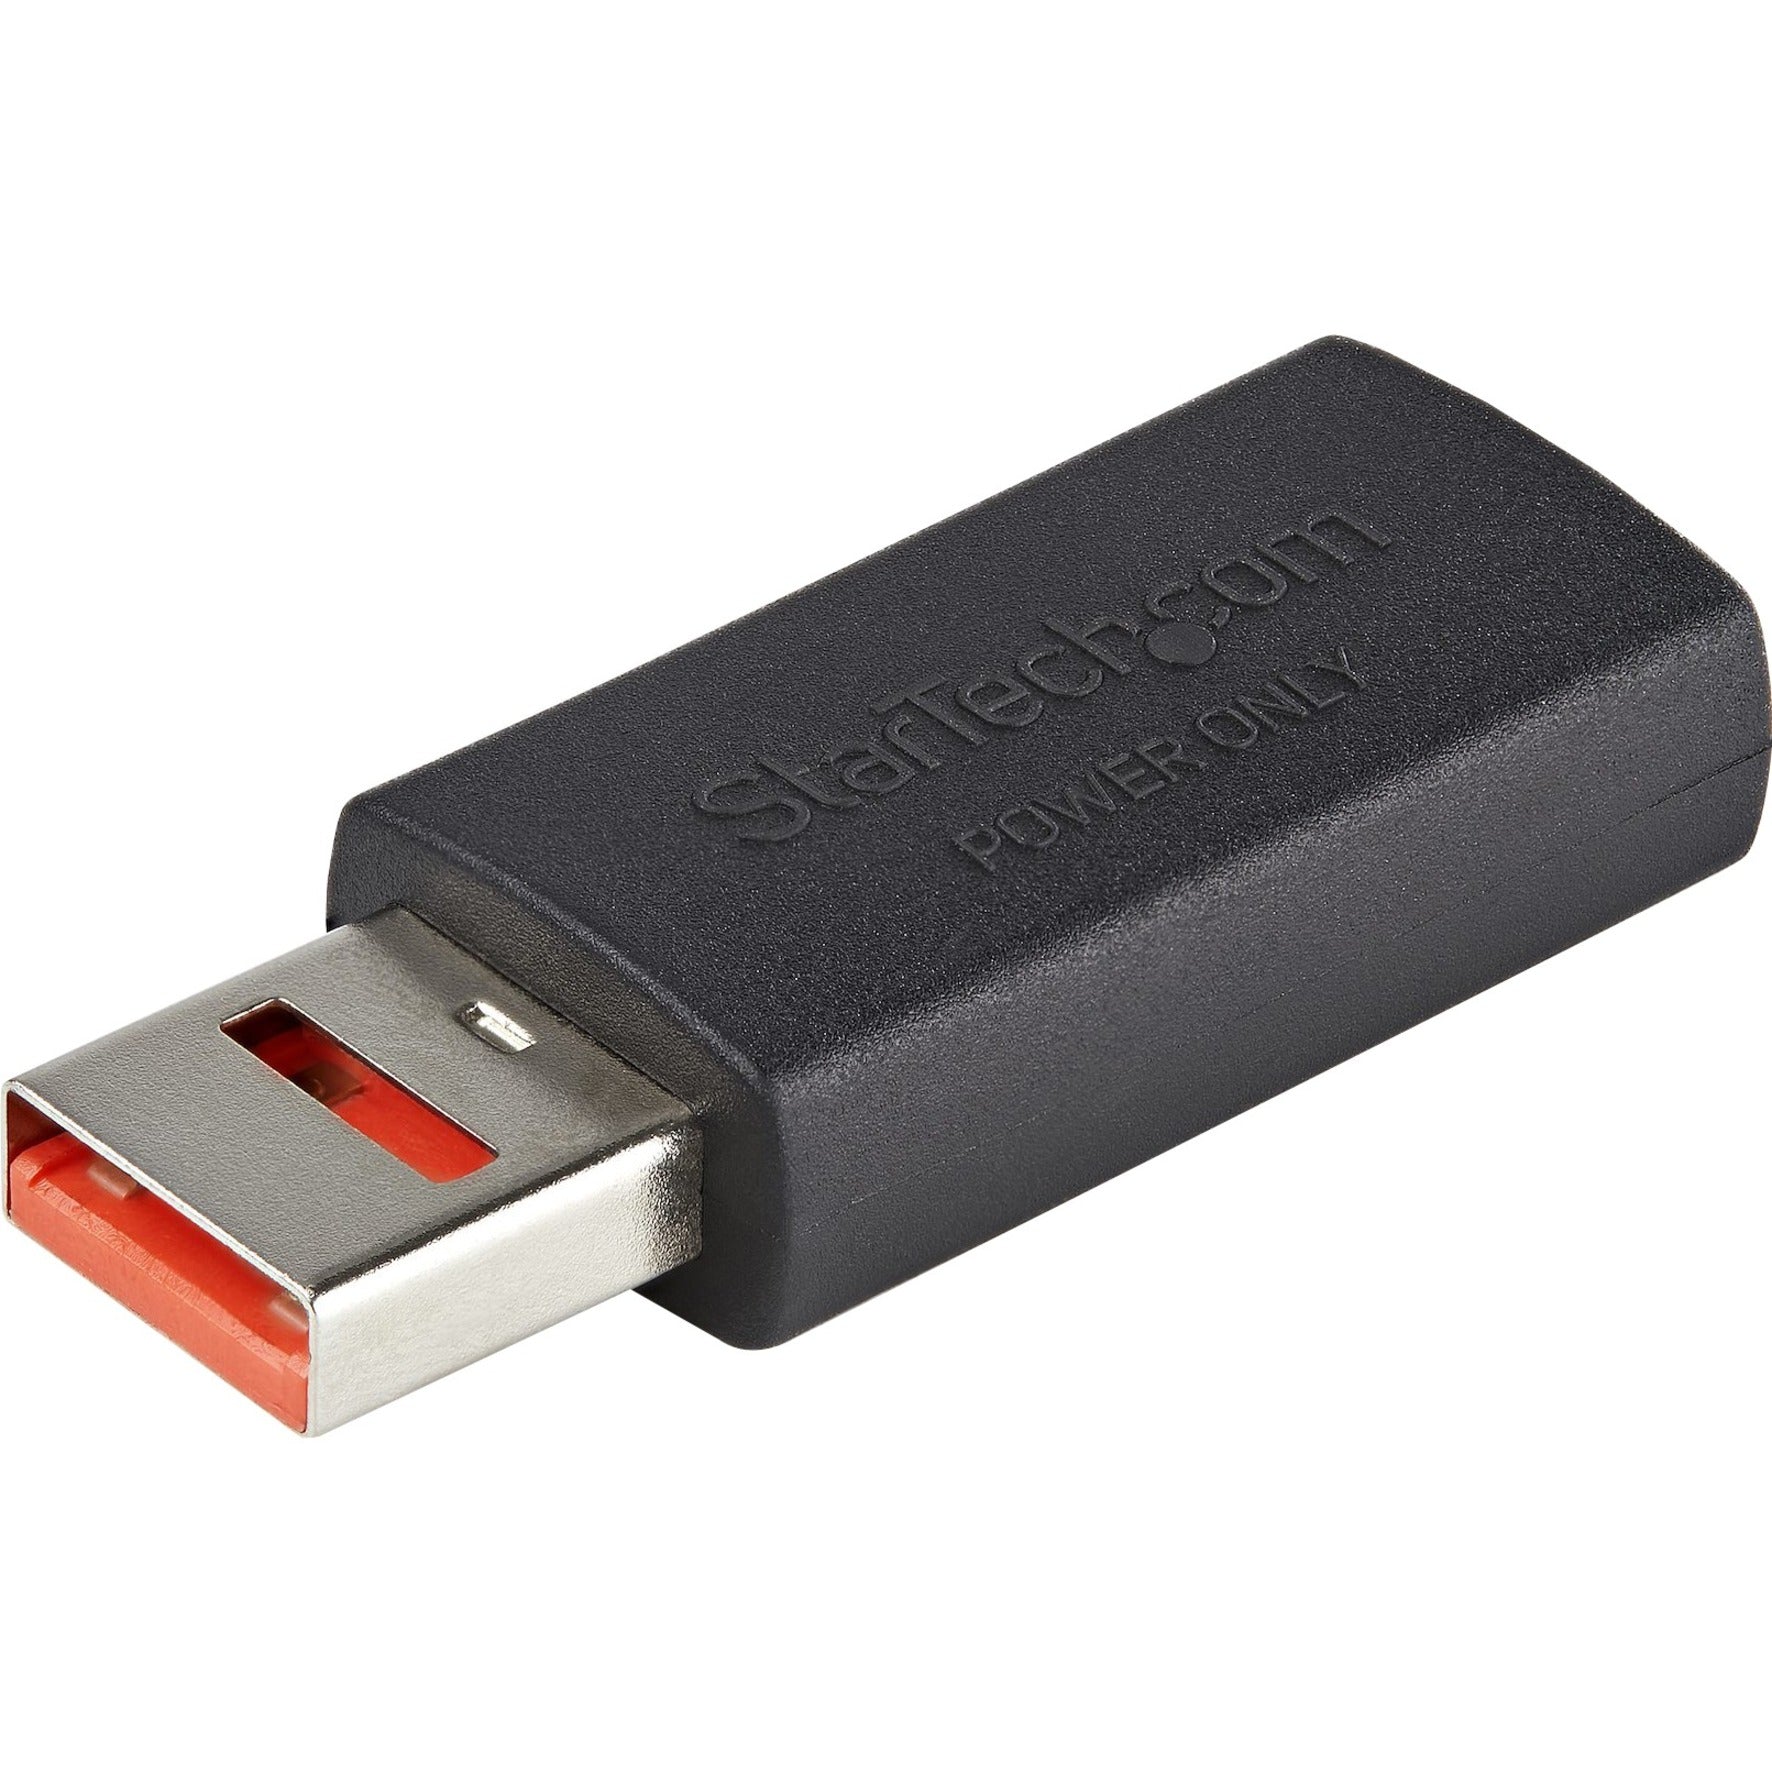 StarTech.com USBSCHAAMF USB Data Transfer Adapter, Male/Female USB-A Data Blocking Charge/Power-Only Charging Adapter for Phone/Tablet